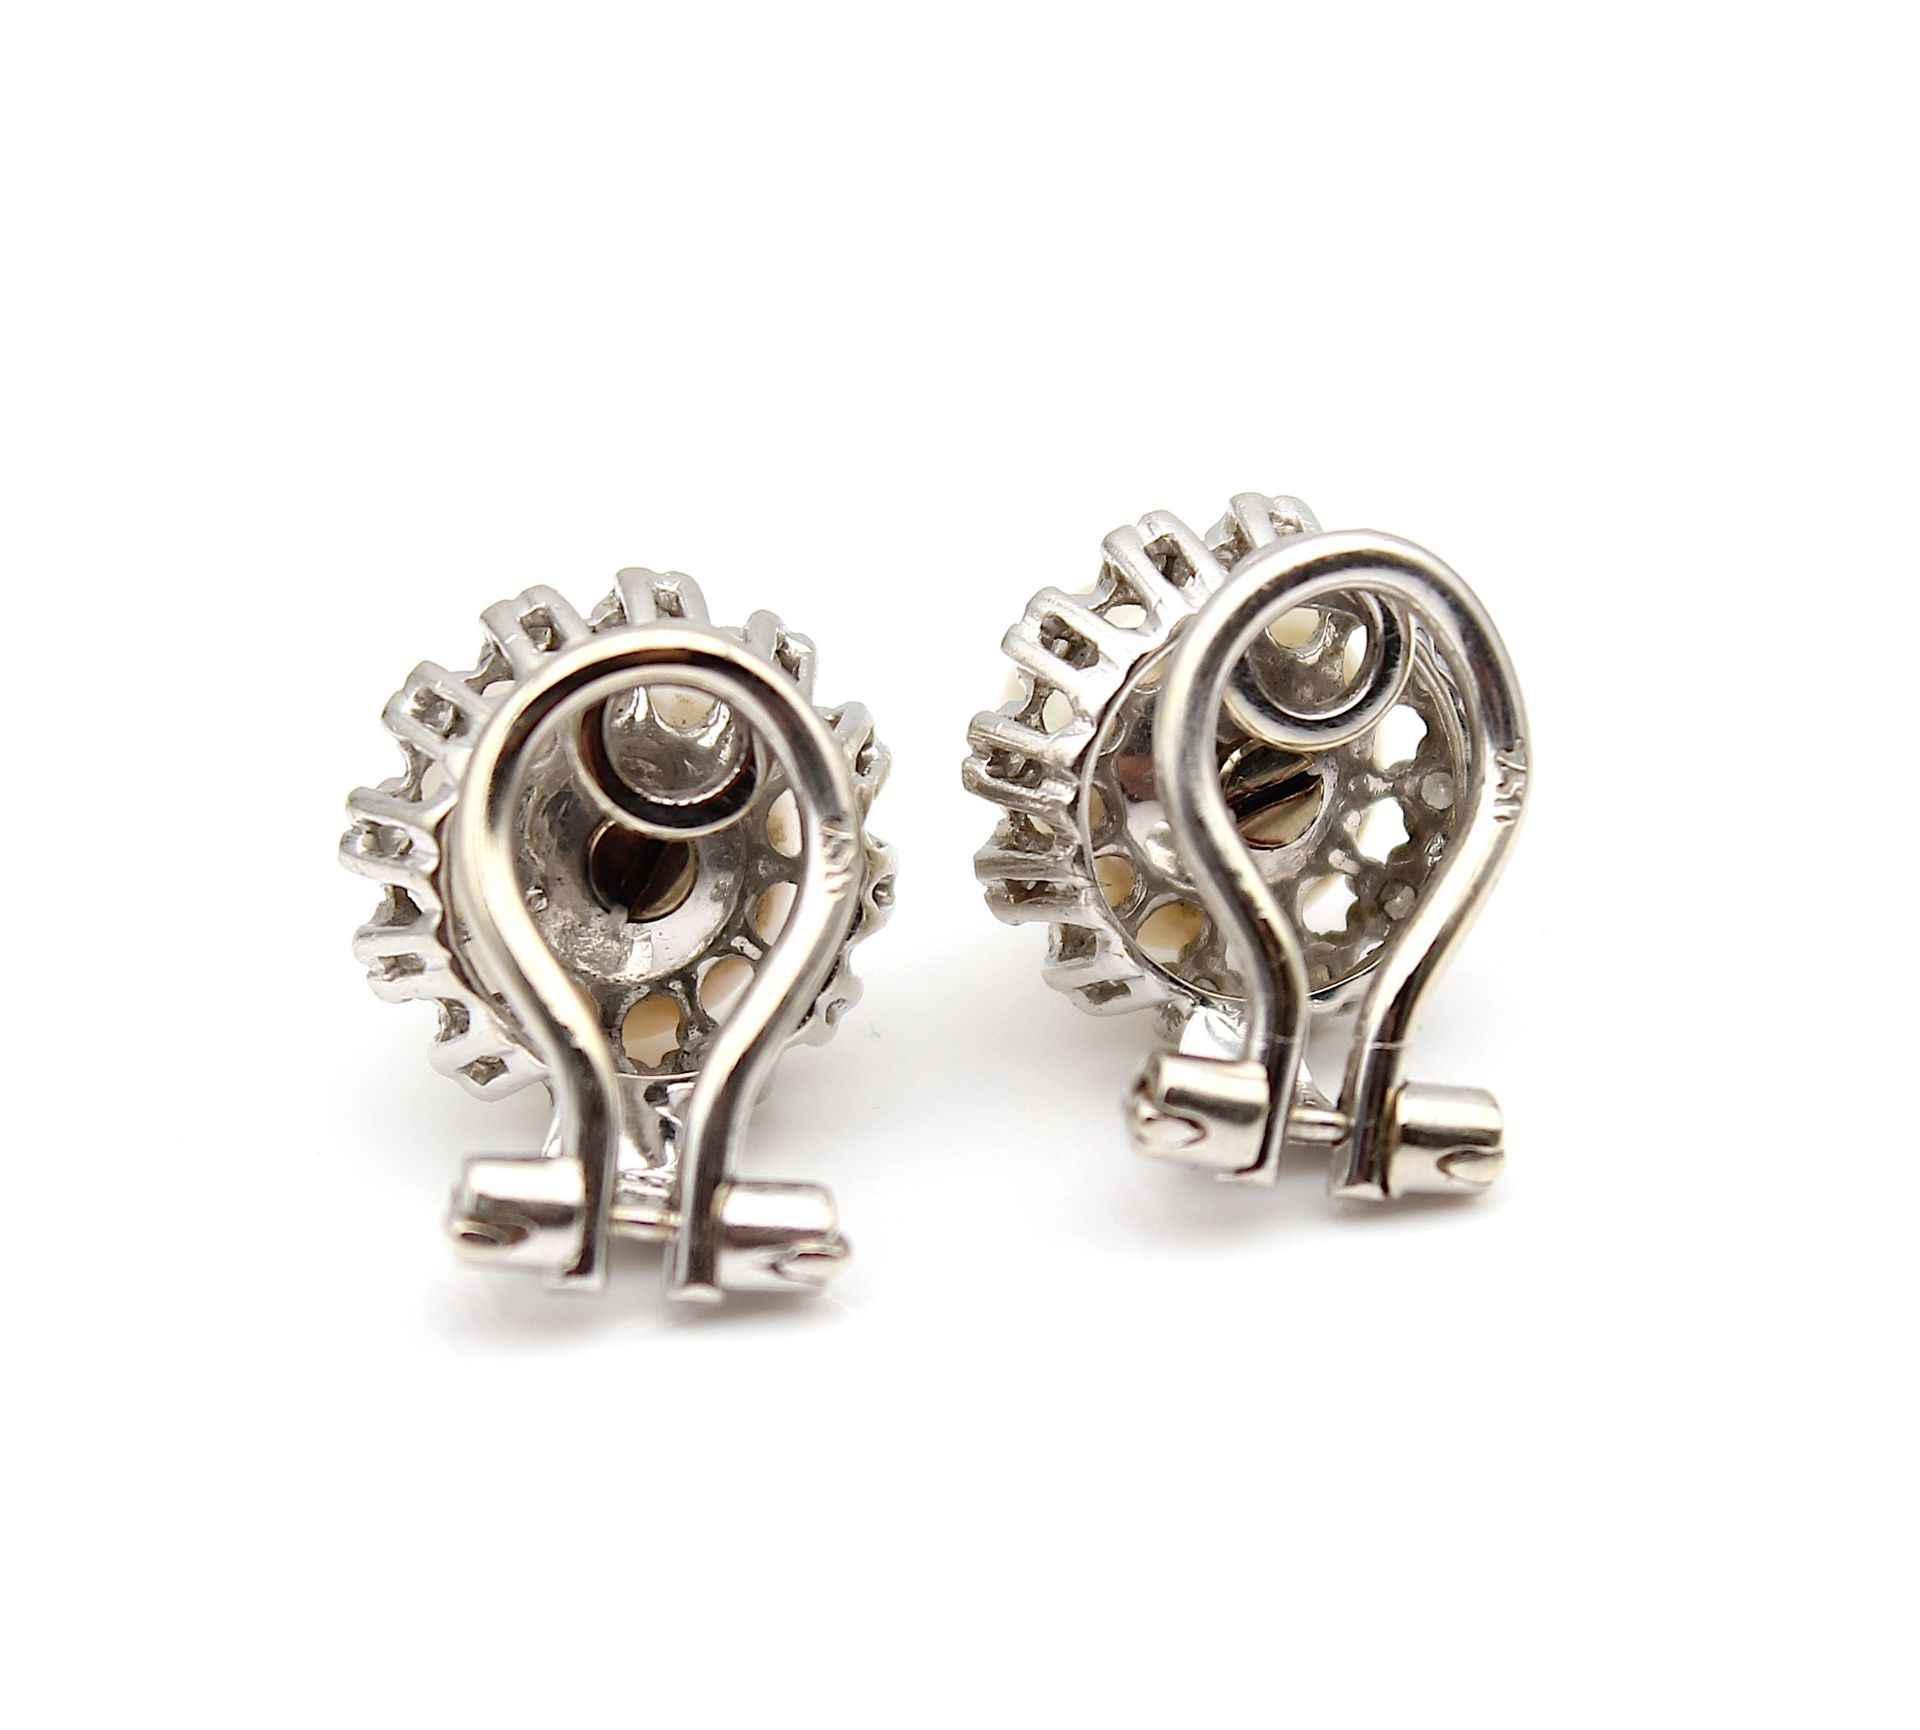 Great vintage earclips with cultured pearl and diamonds - Image 4 of 4